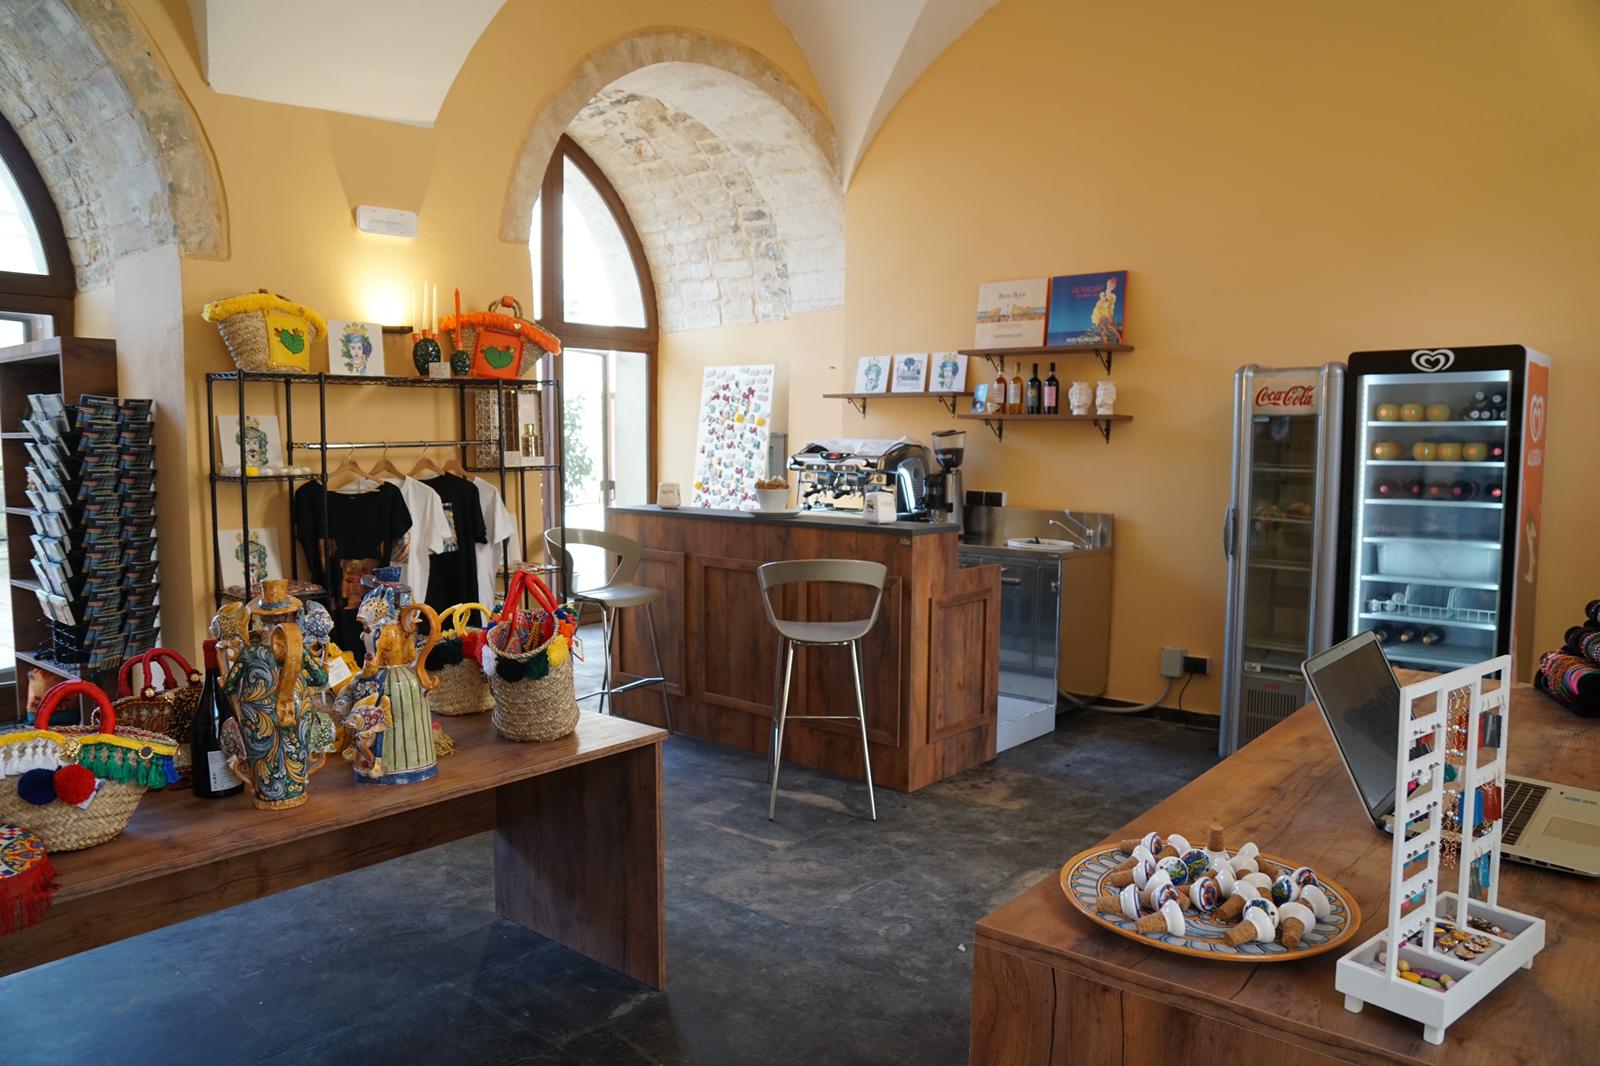 Inauguration on October 28, 2022 of the new “Enjoy Barocco” infopoint, bistro and bookshop services at Donnafugata Castle